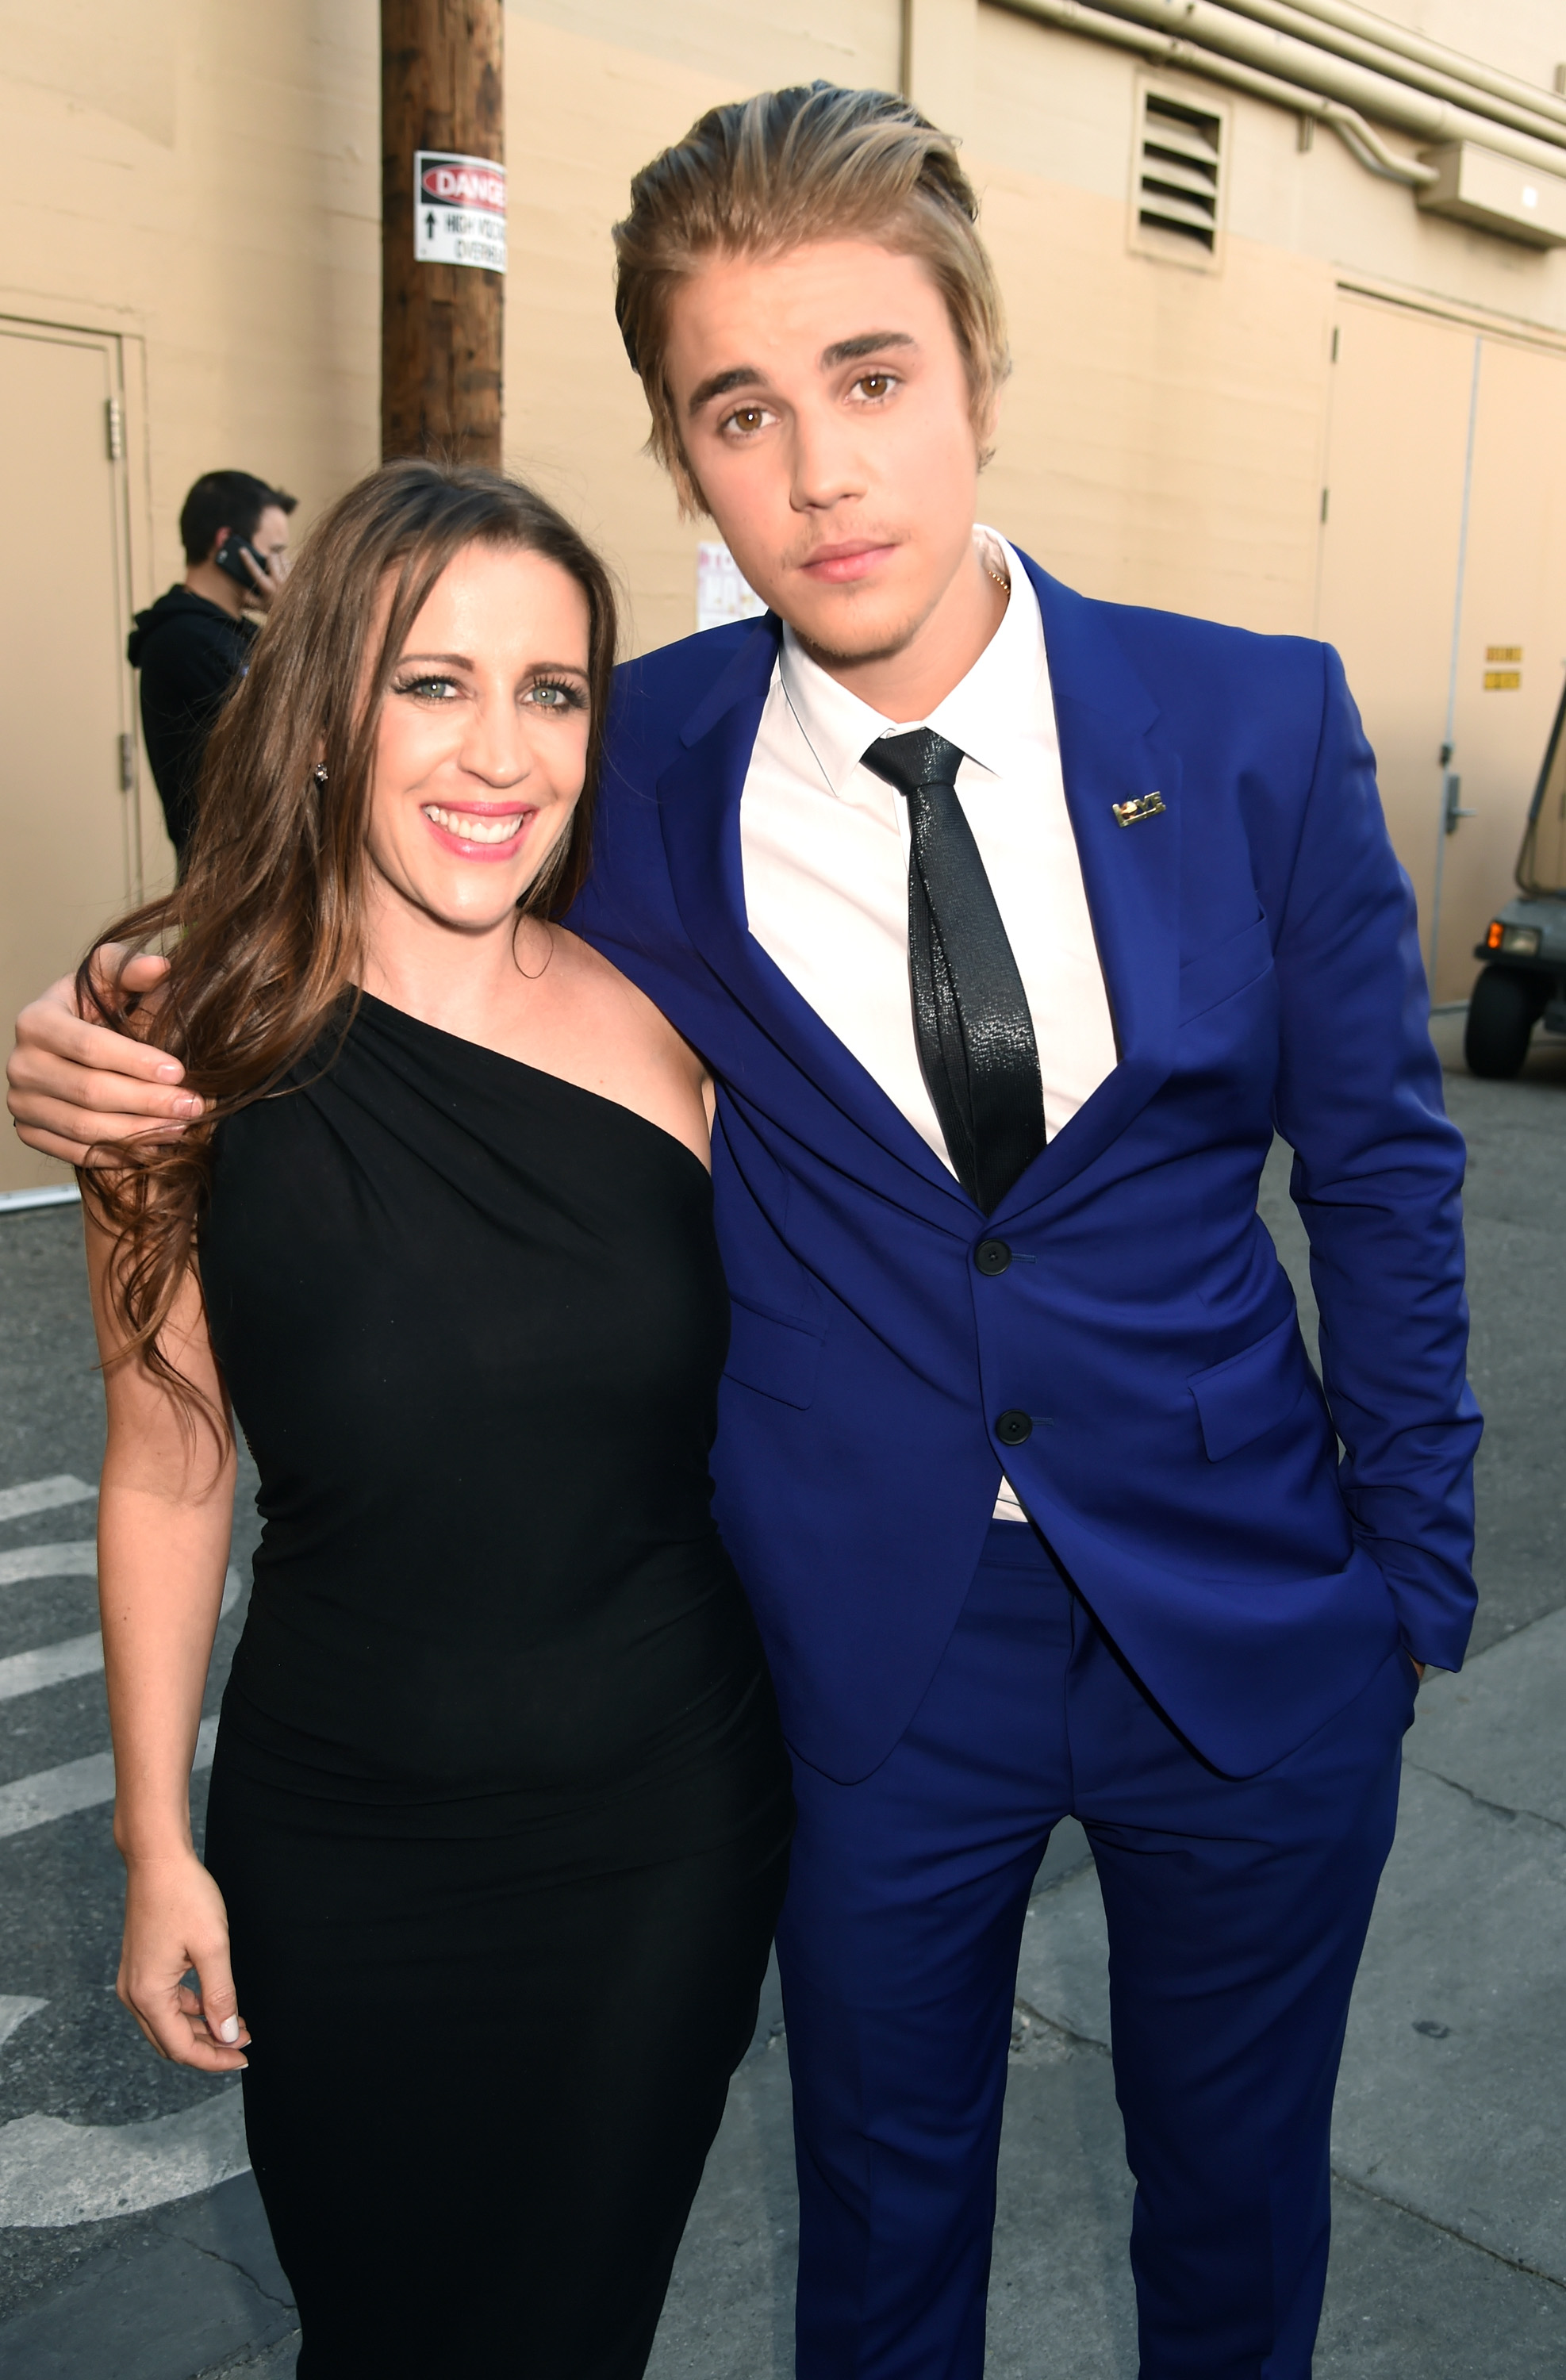 Pattie Mallette and Justin Bieber attend The Comedy Central Roast of Justin Bieber in Los Angeles, California, on March 14, 2015. | Source: Getty Images